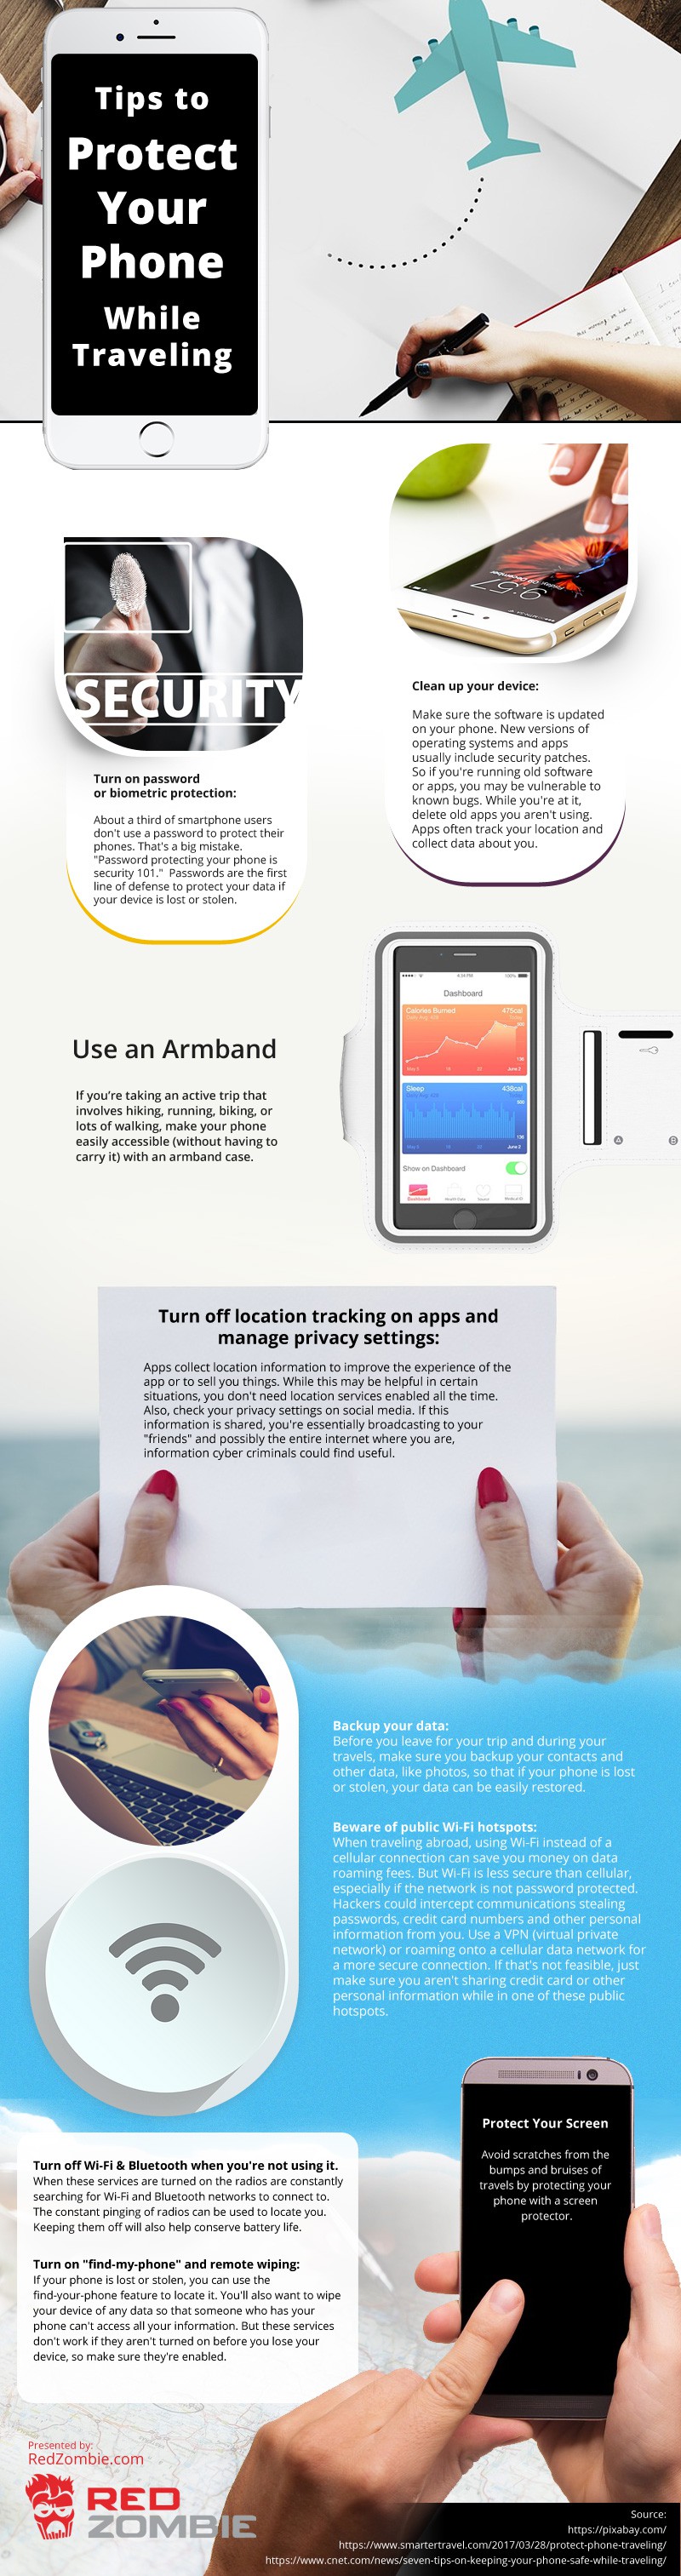 Tips-to-Protect-Your-Phone-While-Traveling Infographic